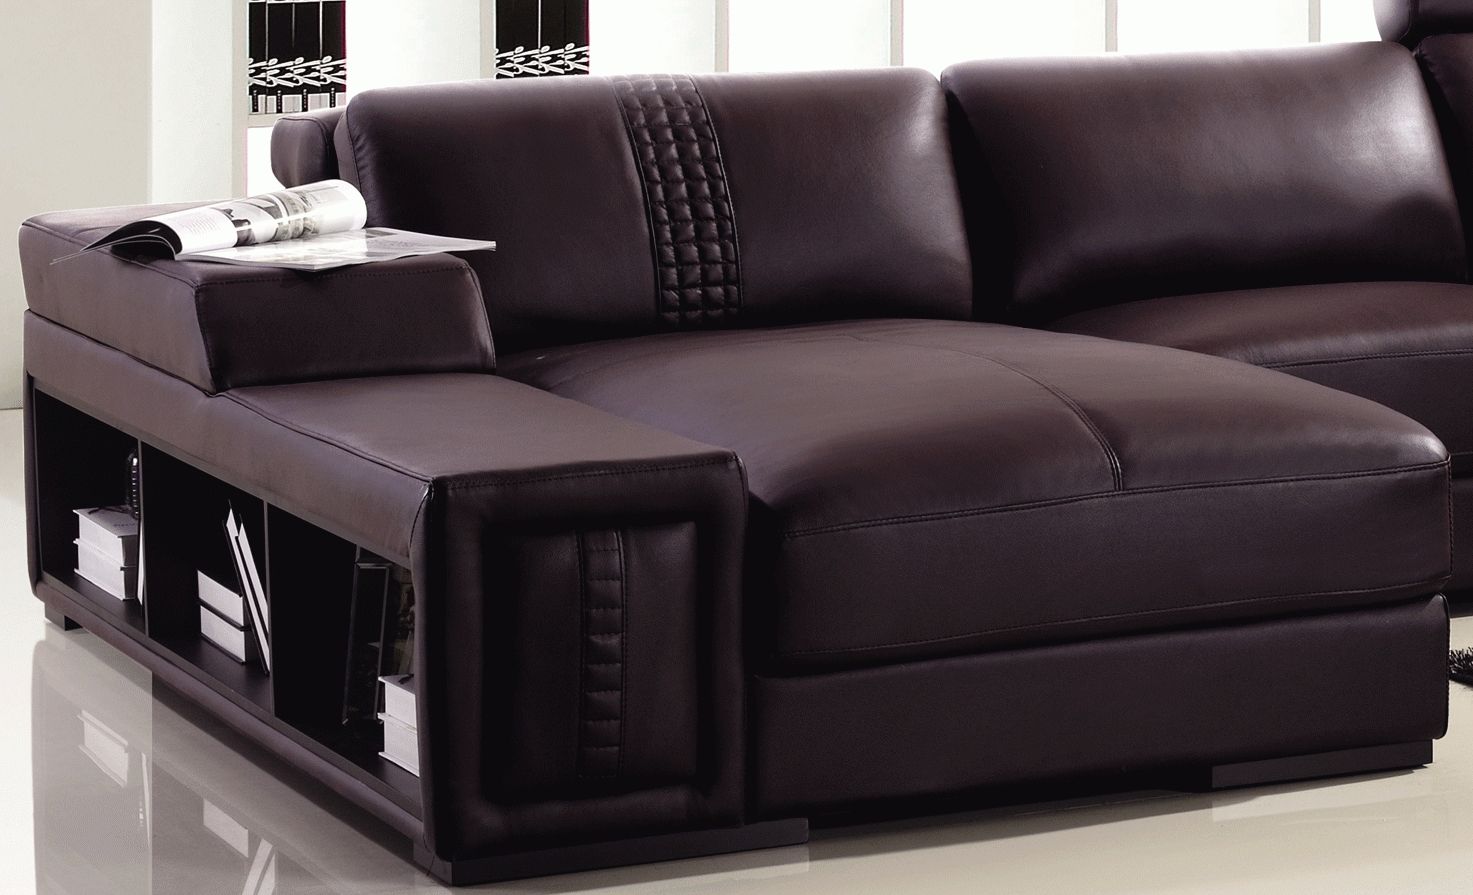 T132 Mini Modern Brown Leather Sectional Sofa Throughout Mini Sectional Sofas (View 4 of 30)